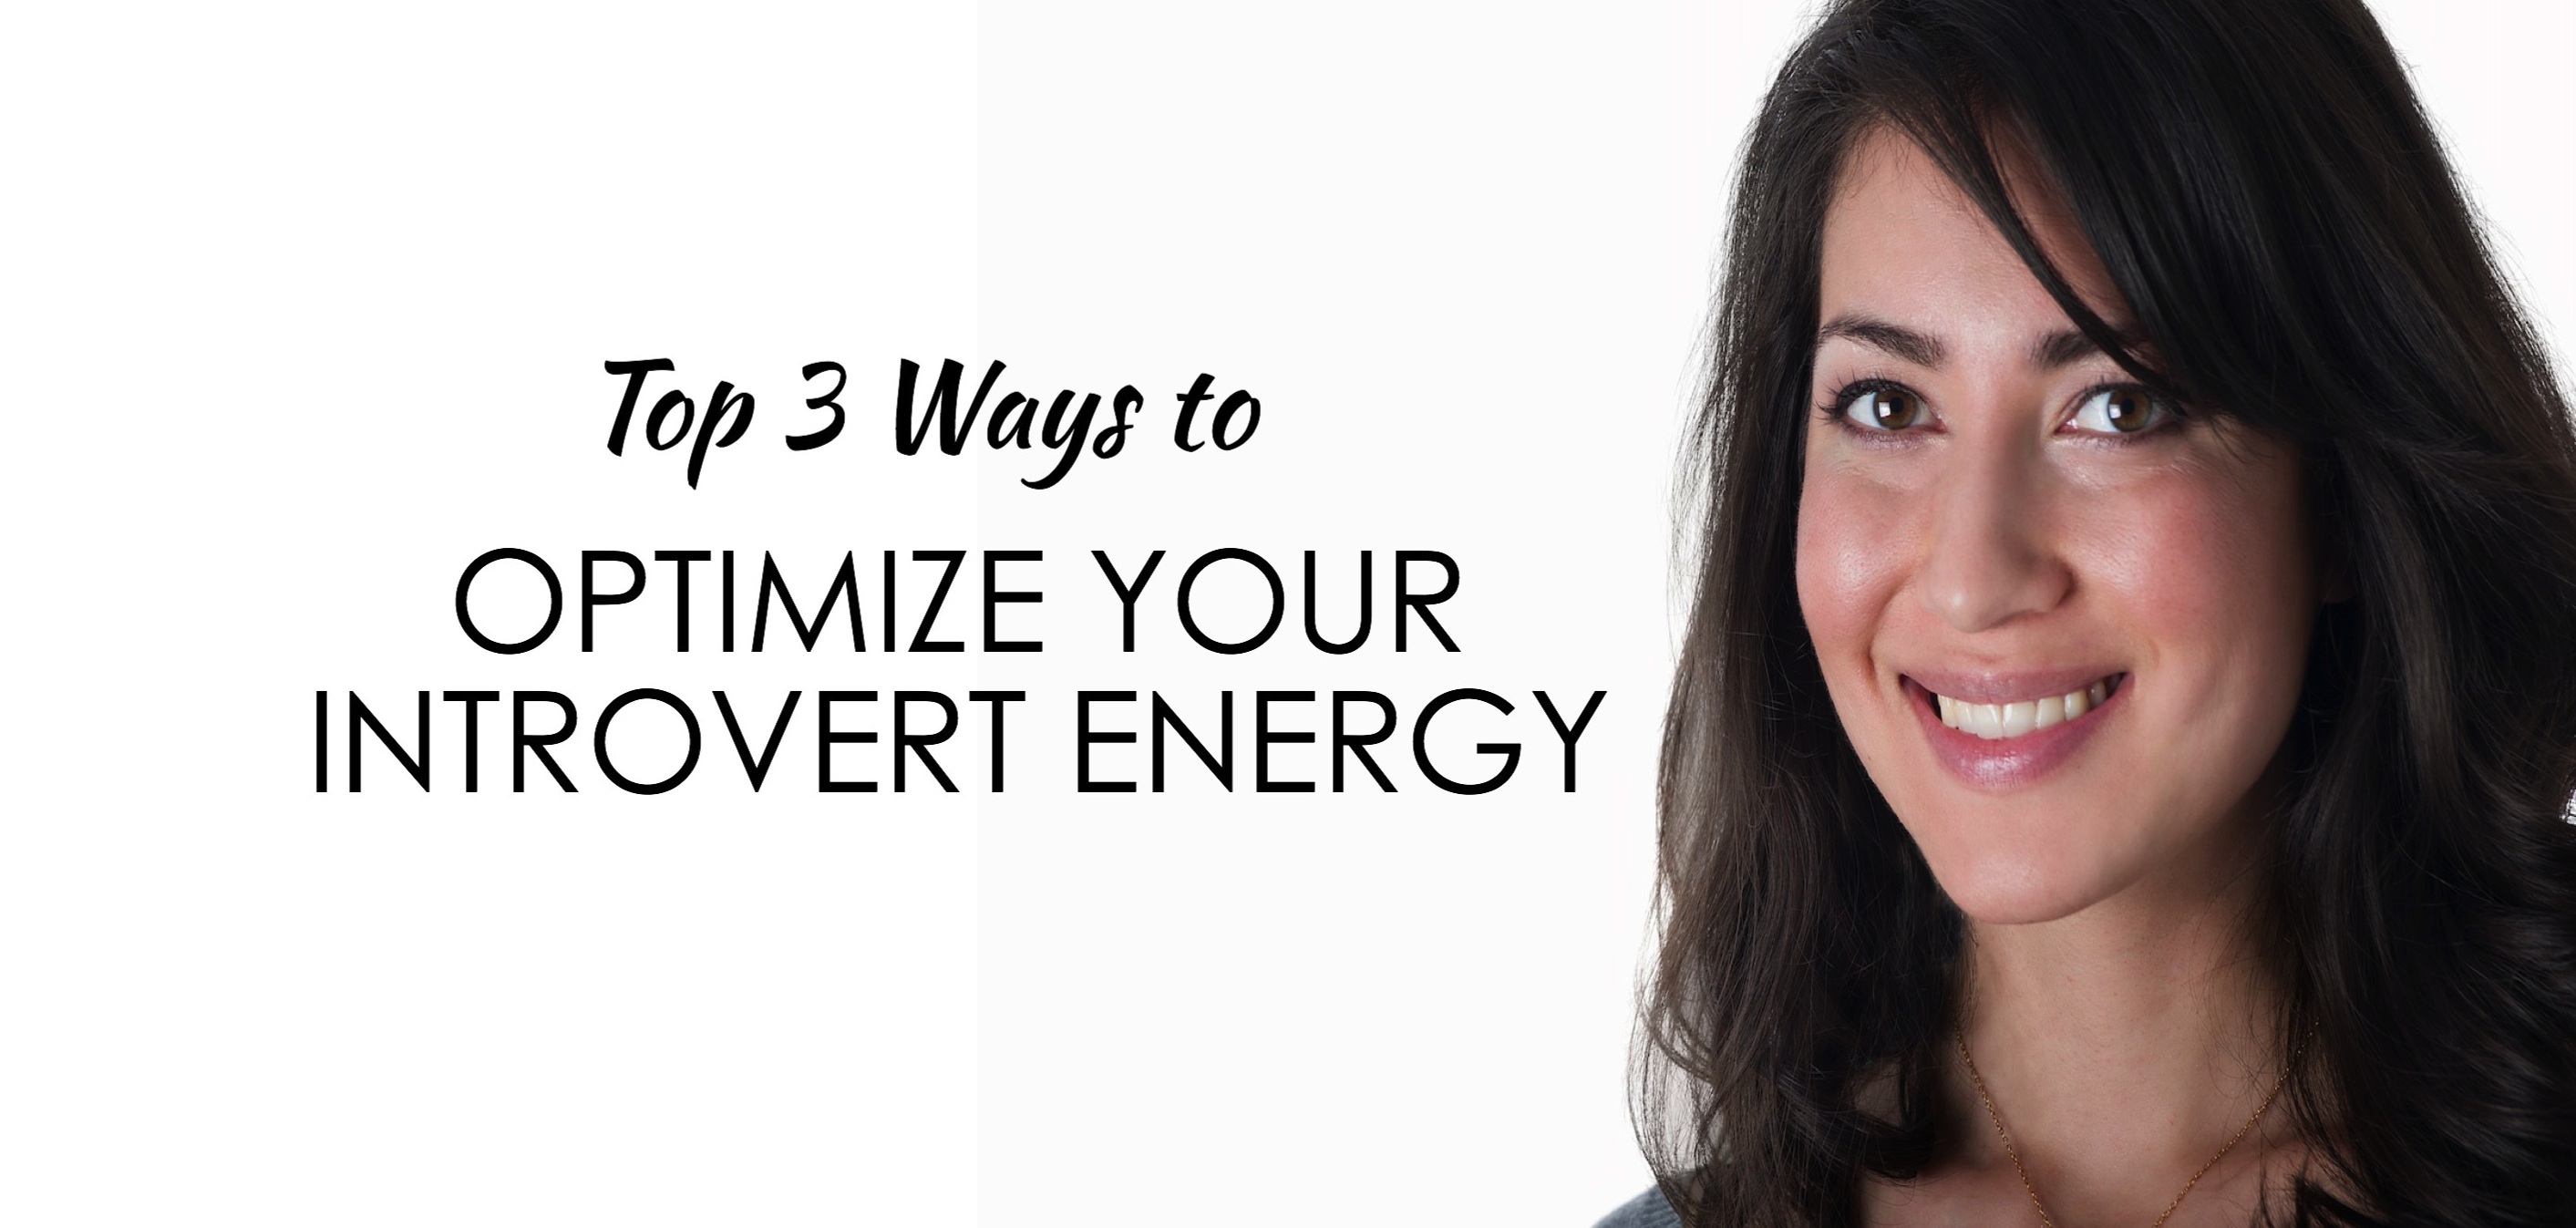 Top 3 Ways to Optimize Your Introvert Energy